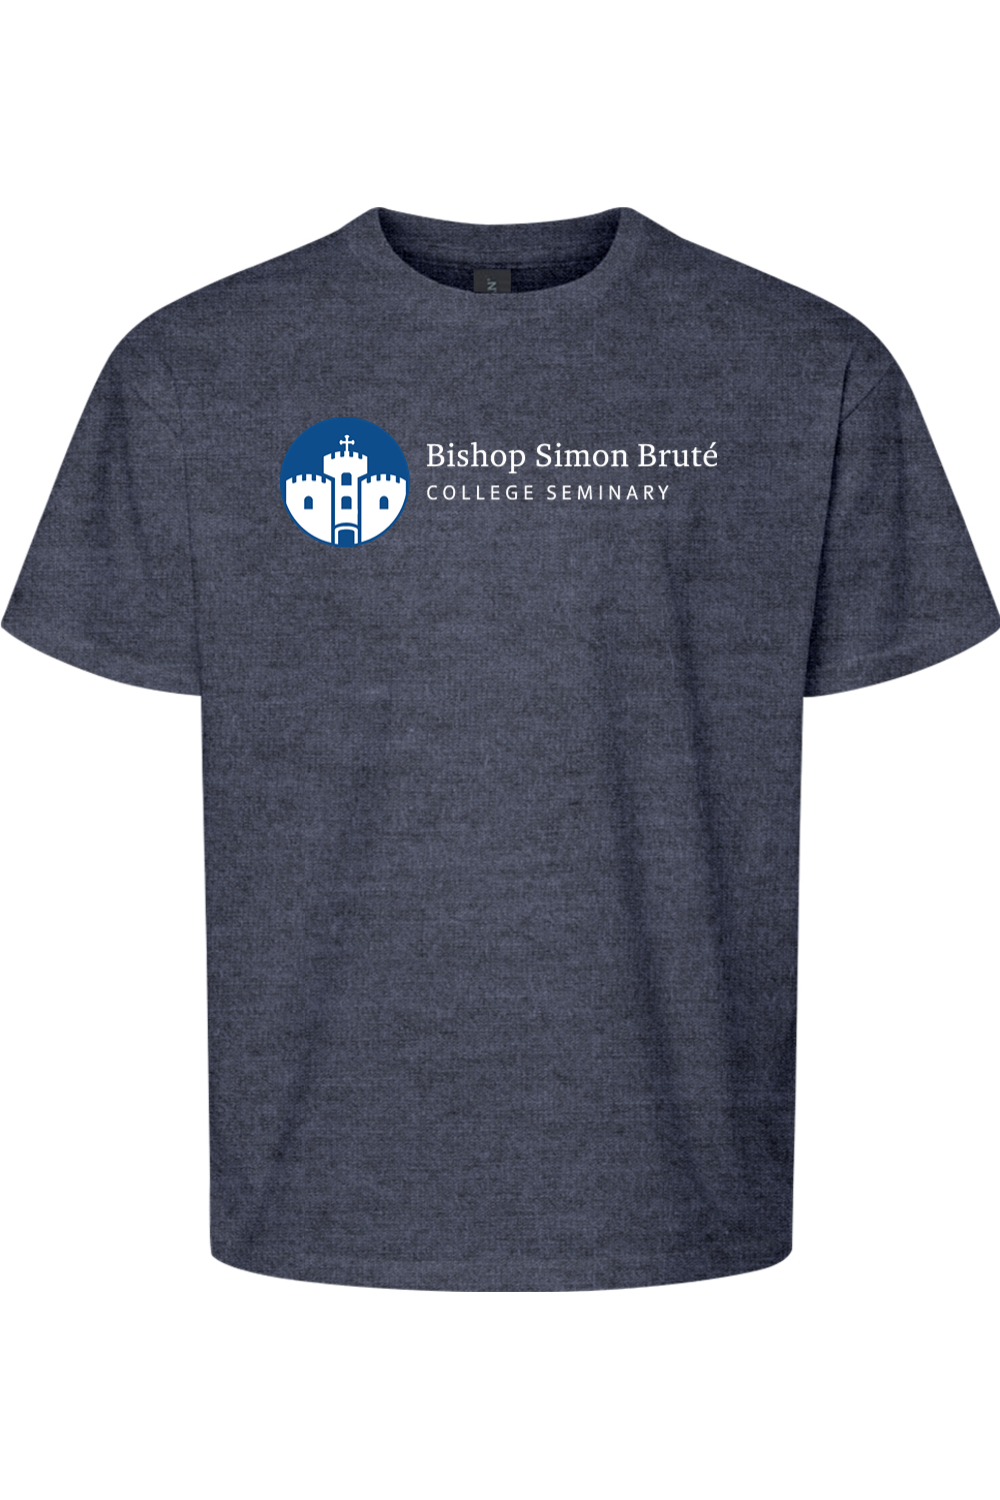 Bishop Simon Brute College Seminary Youth -   Blue